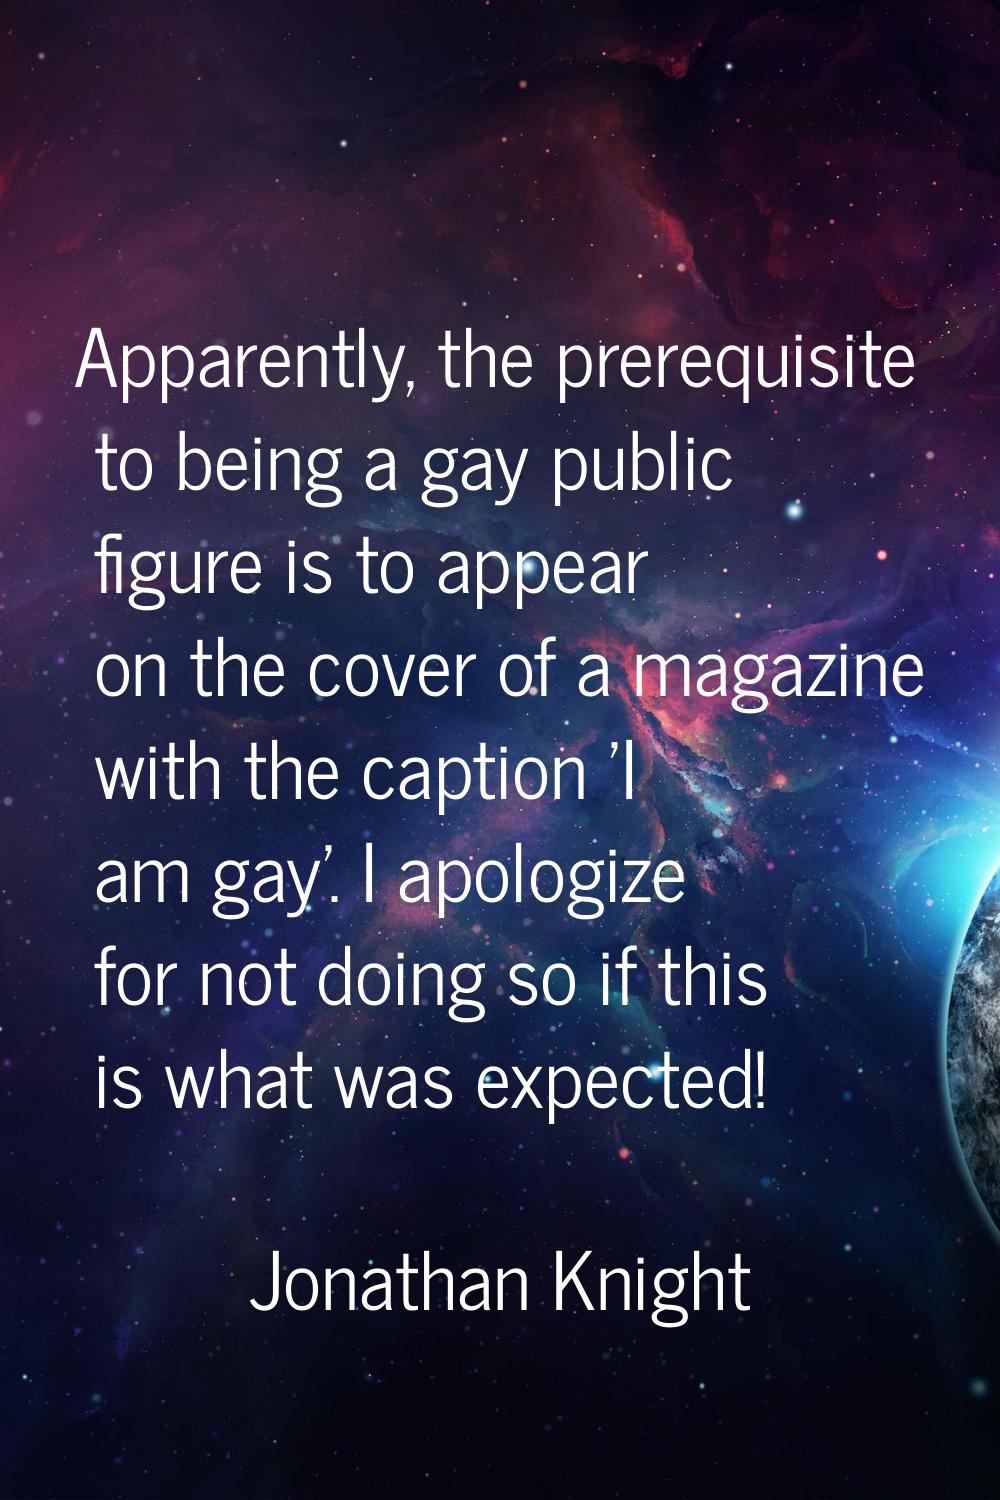 Apparently, the prerequisite to being a gay public figure is to appear on the cover of a magazine w